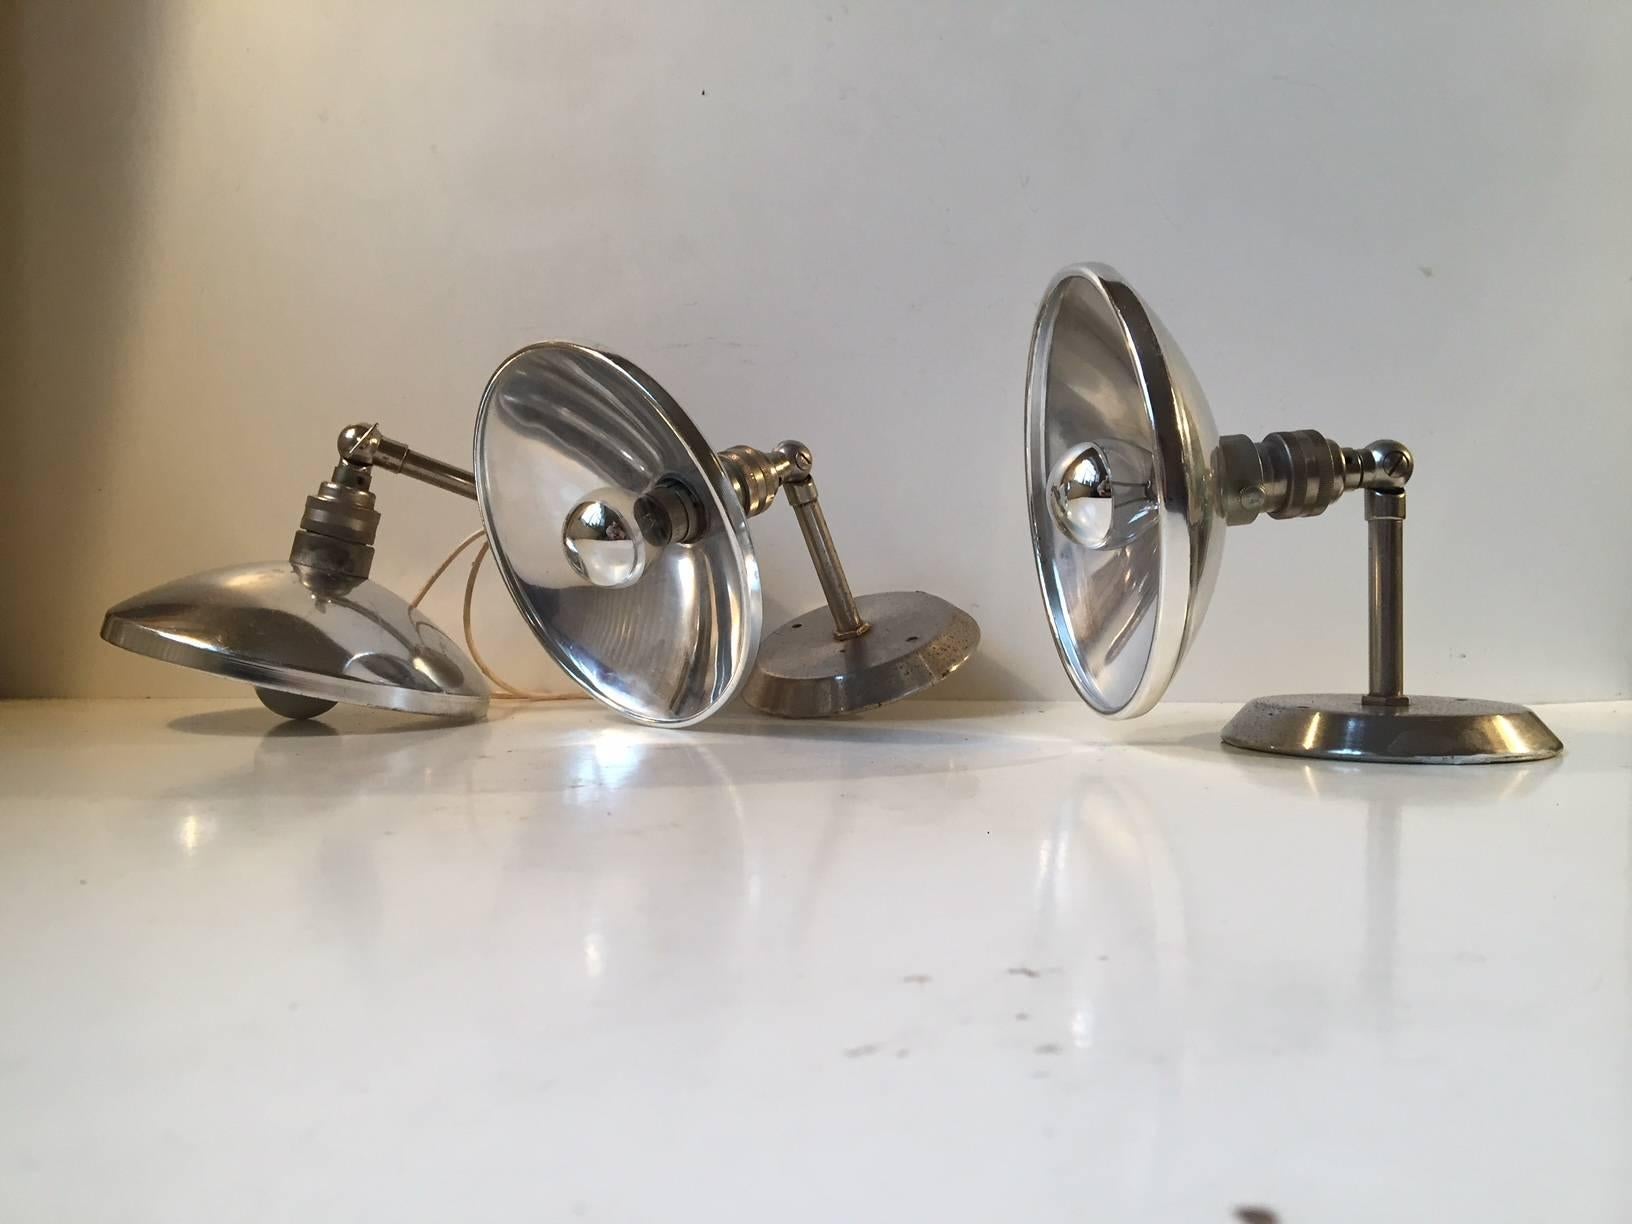 This set of three French wall lights features engine turned stems and aluminum reflectors. This set was sourced from an old warehouse. The style is reminiscent of Jielde and Bauhaus fixtures. They are fitted with their original Bayonet socket.